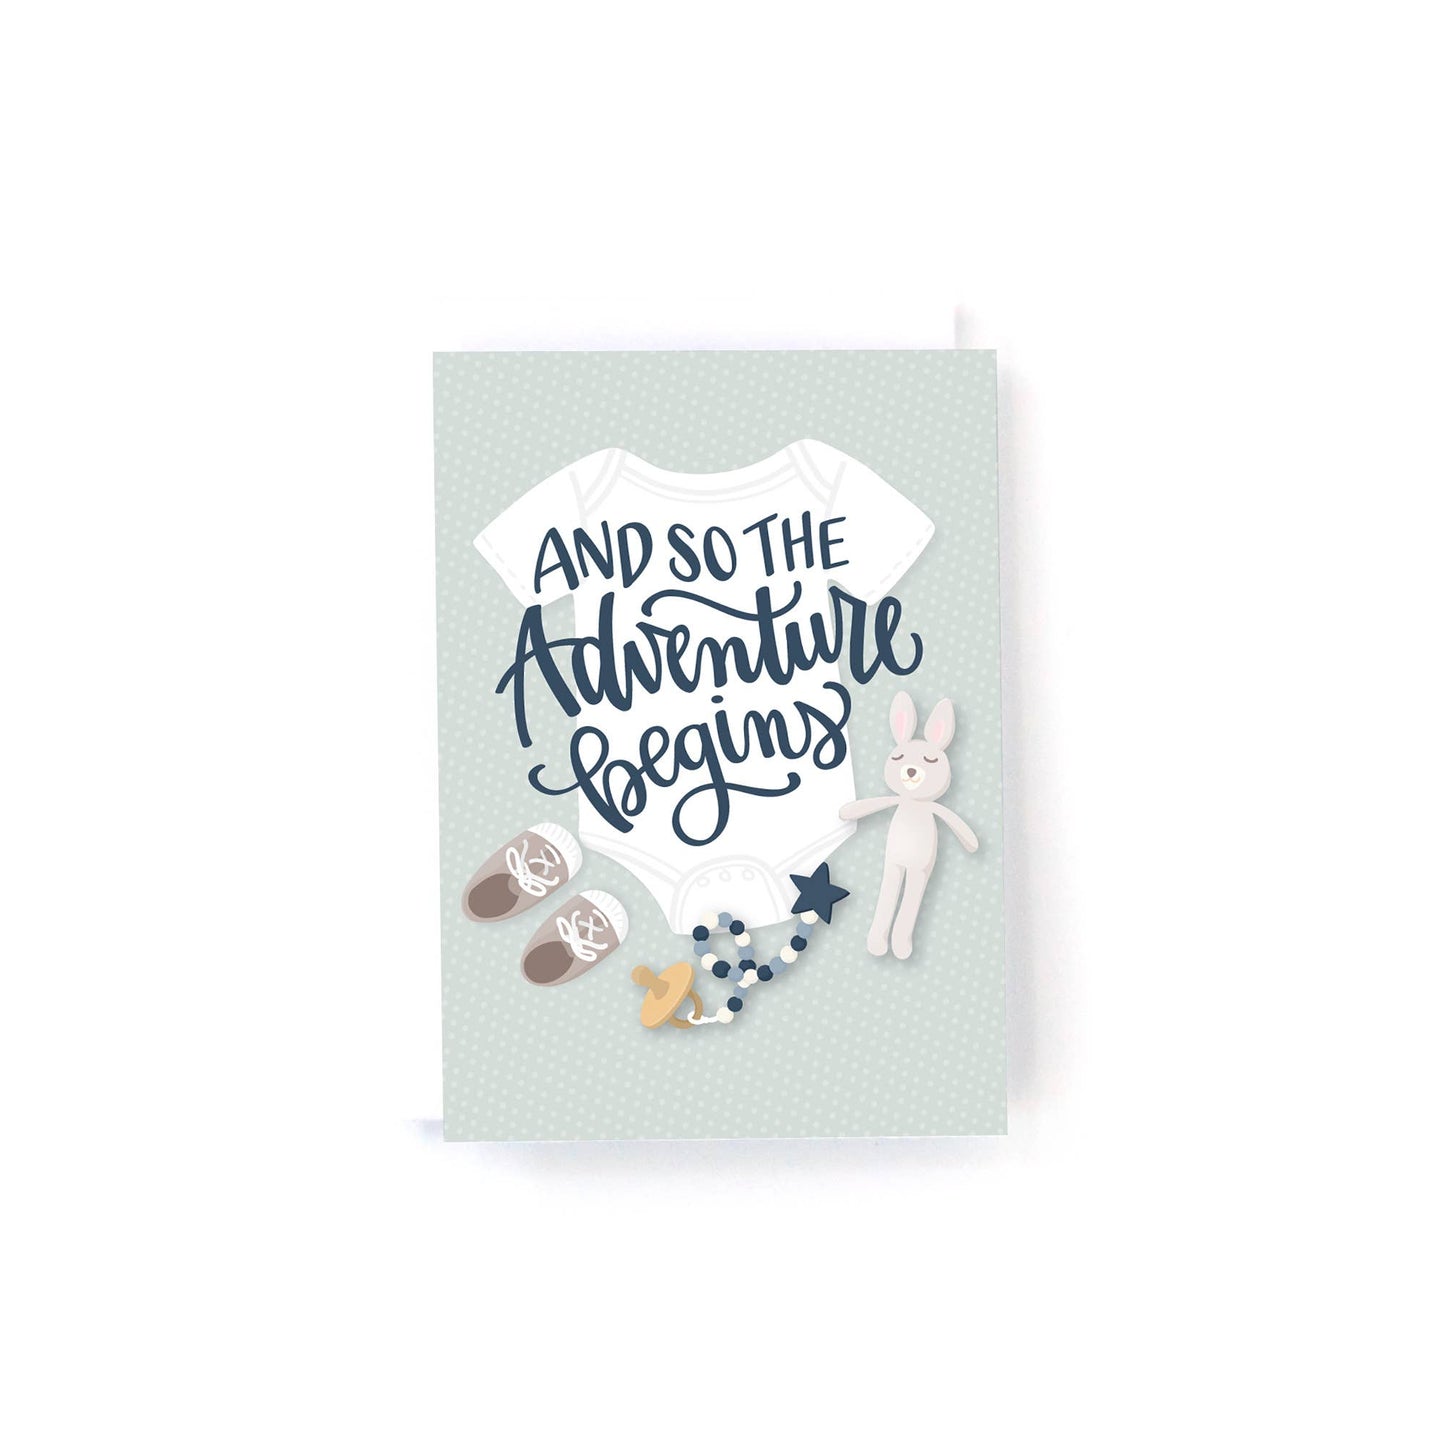 Pedaller Designs - And so the adventure begins Mini Greeting Card